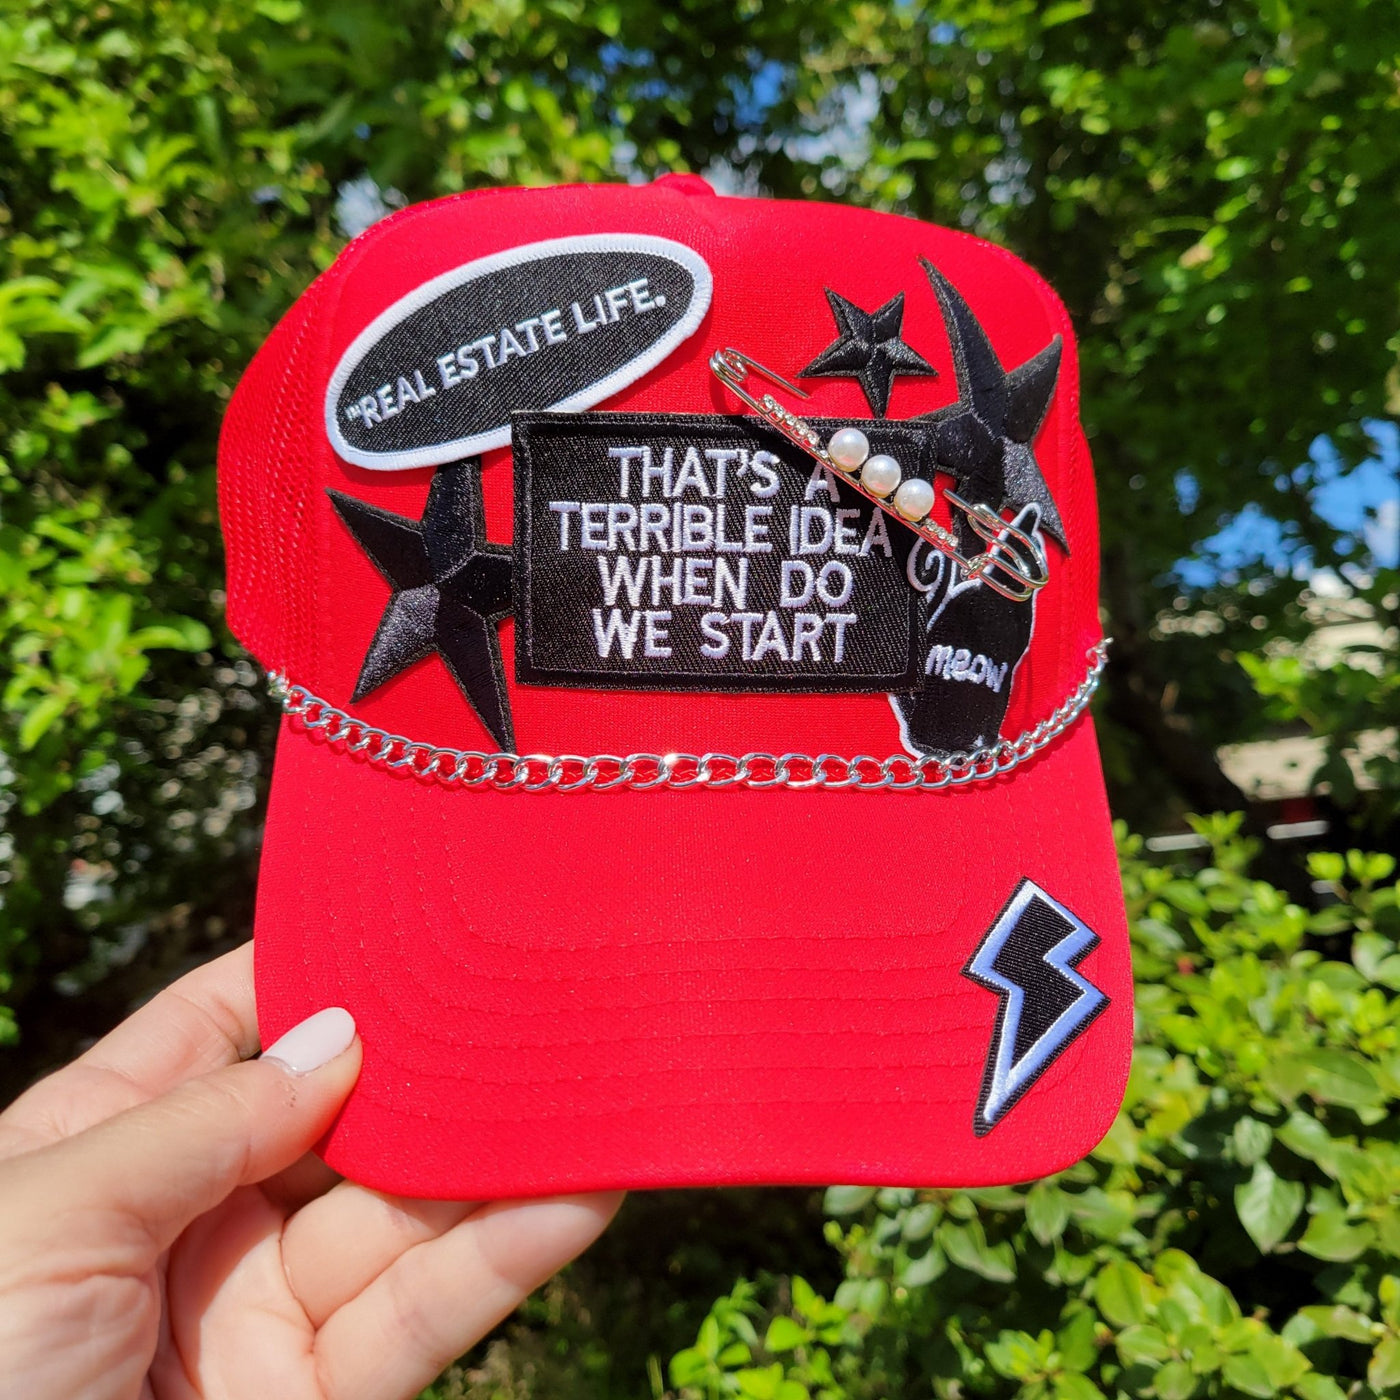 Foam Trucker Hat - Real Estate Life. - That's a Terrible Idea, When Do We Start - Cat- Stars - Pin with Pearls - All Things Real Estate